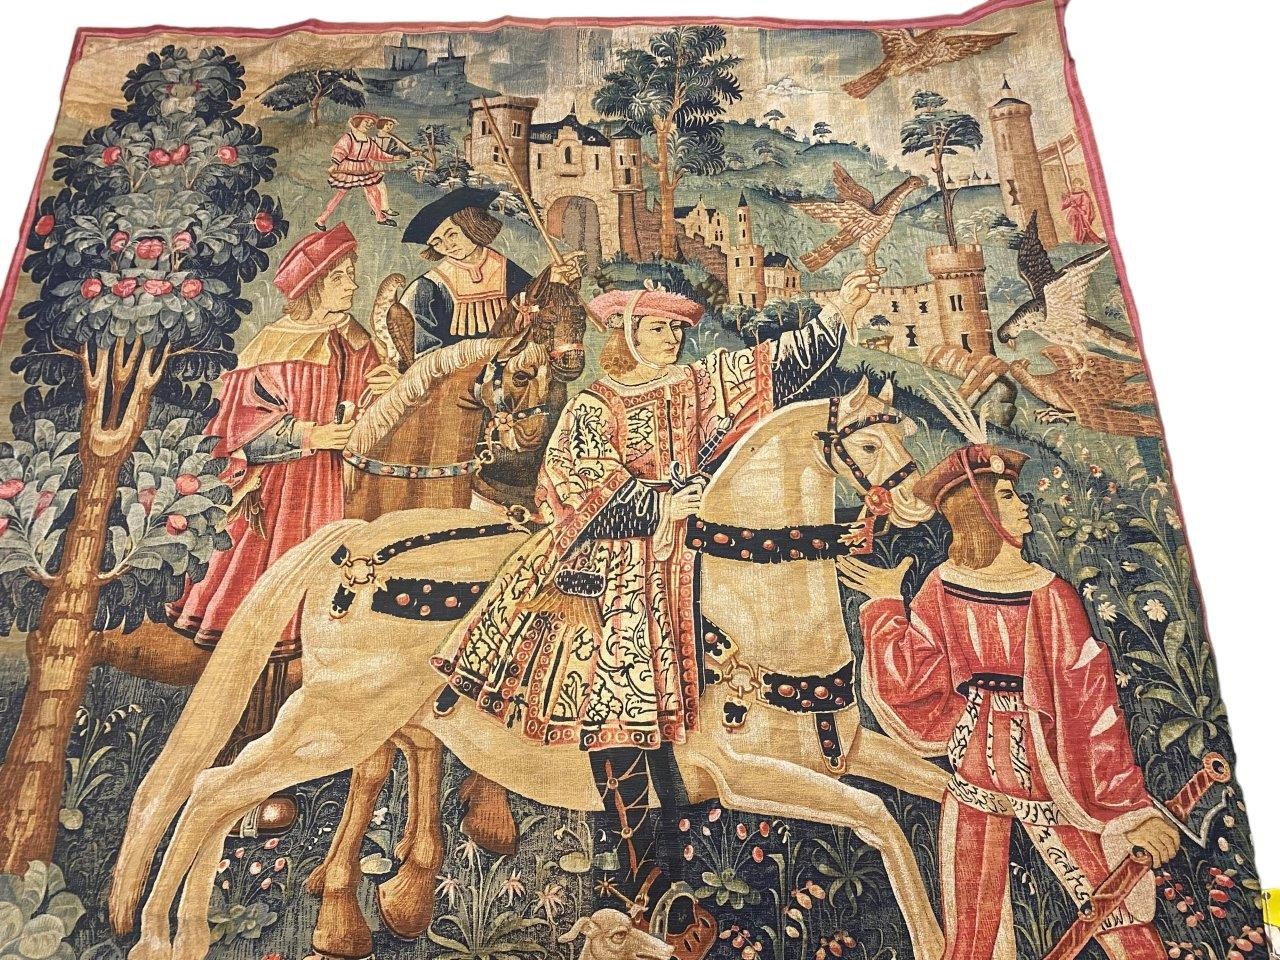 C16th style wall hanging tapestry, stylized Tudor Gentlemen hunting in Landscape scene, 212cm x